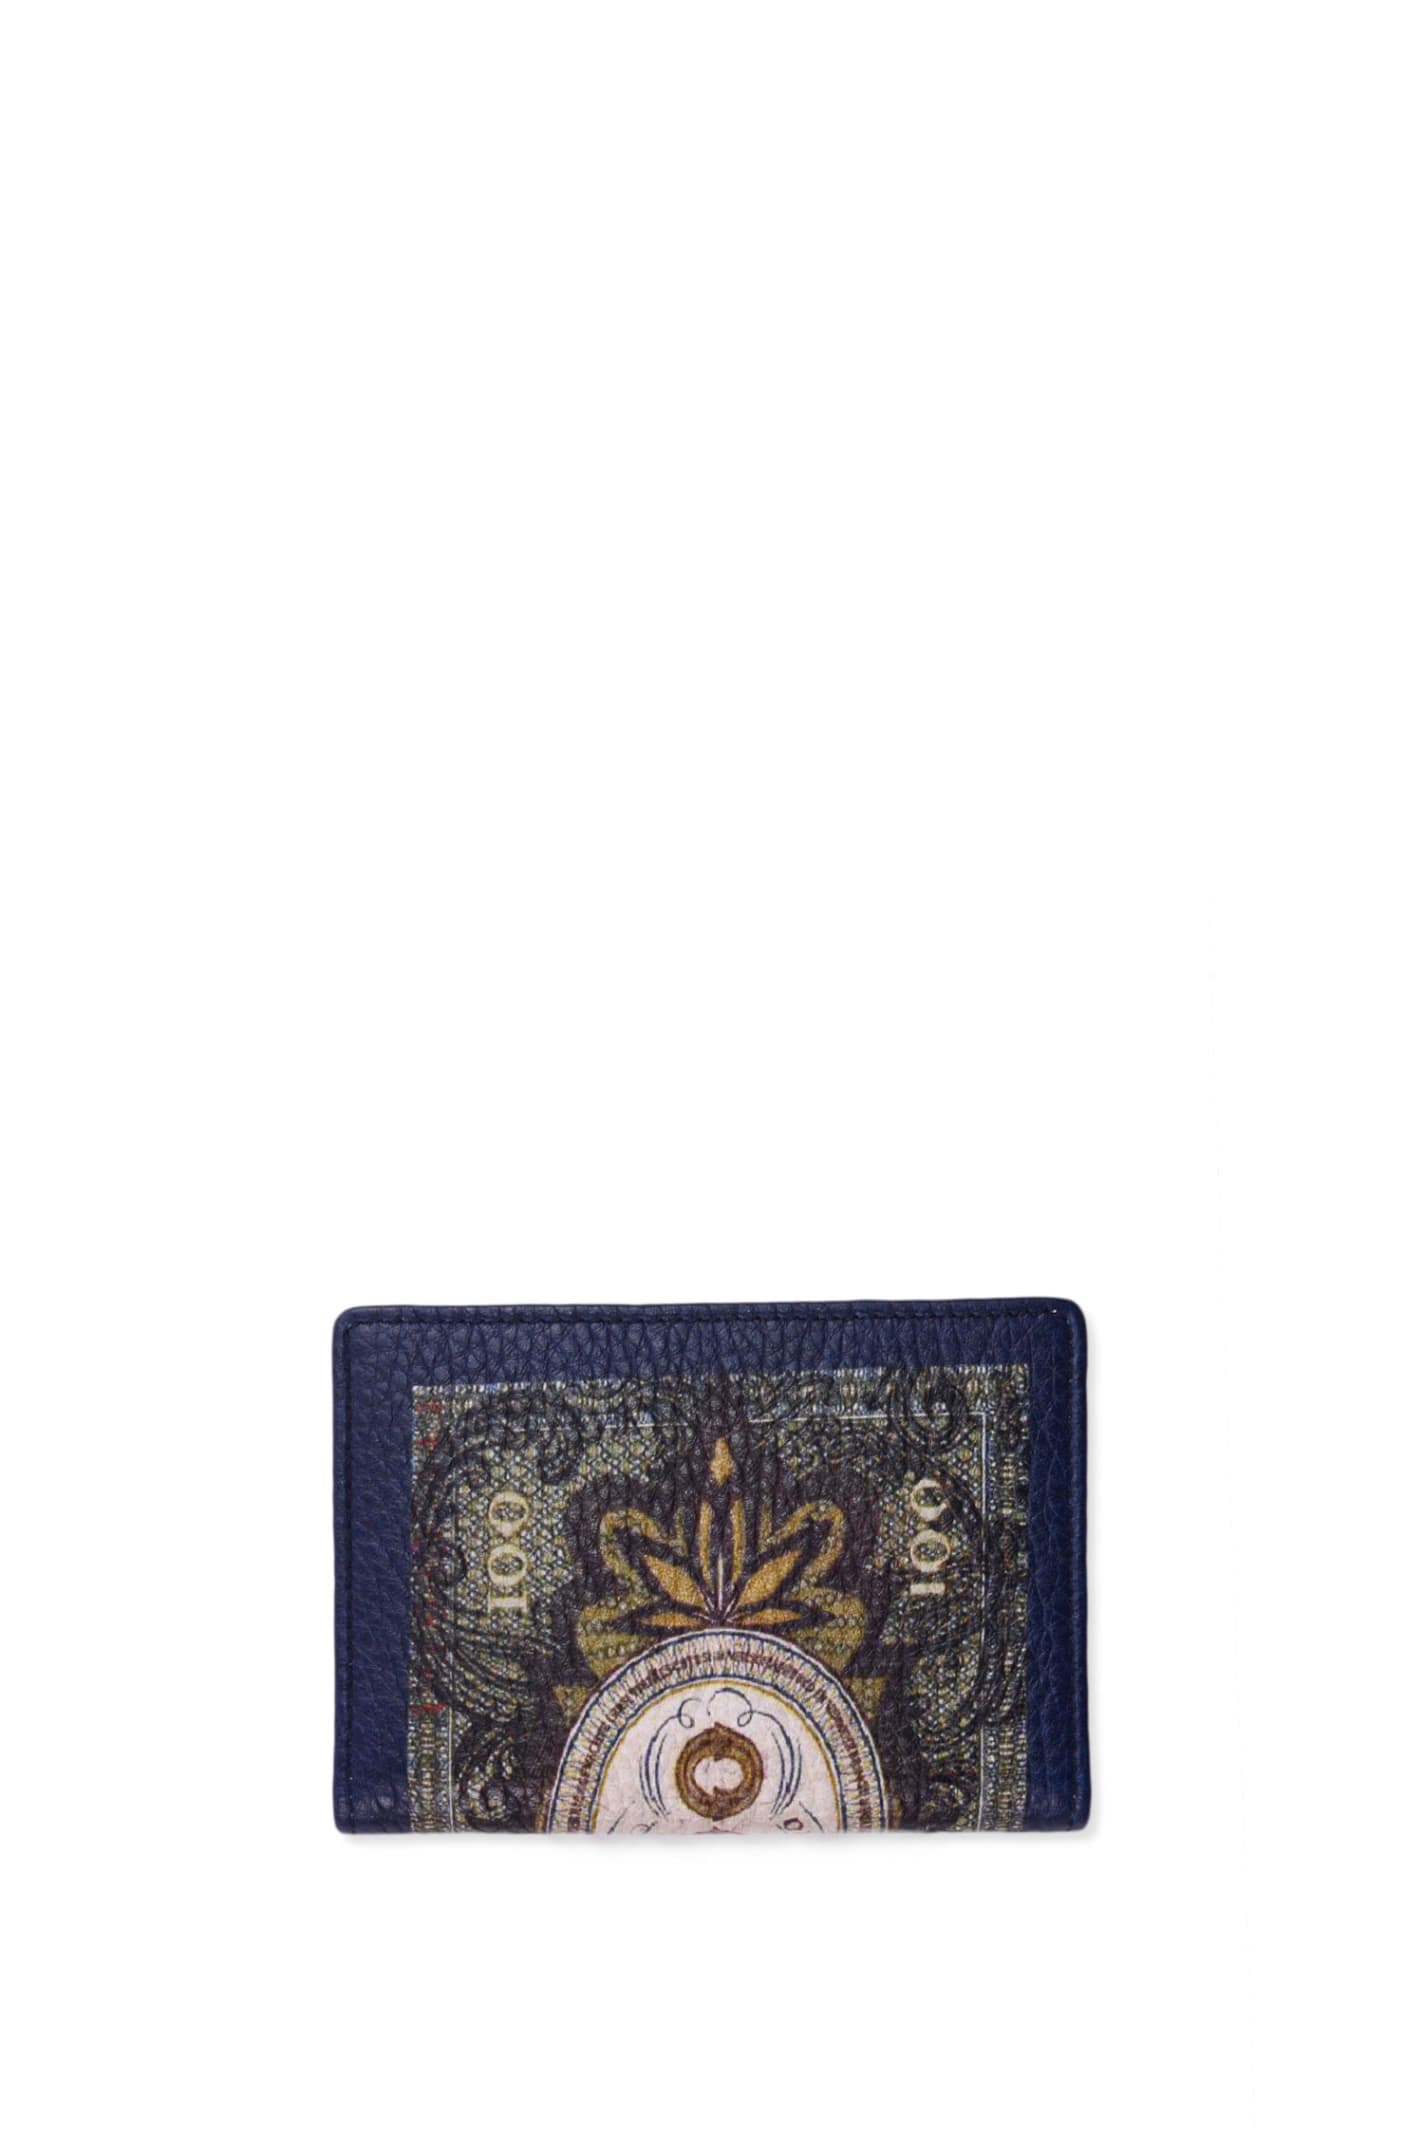 Etro Printed Leather Business Card Holder